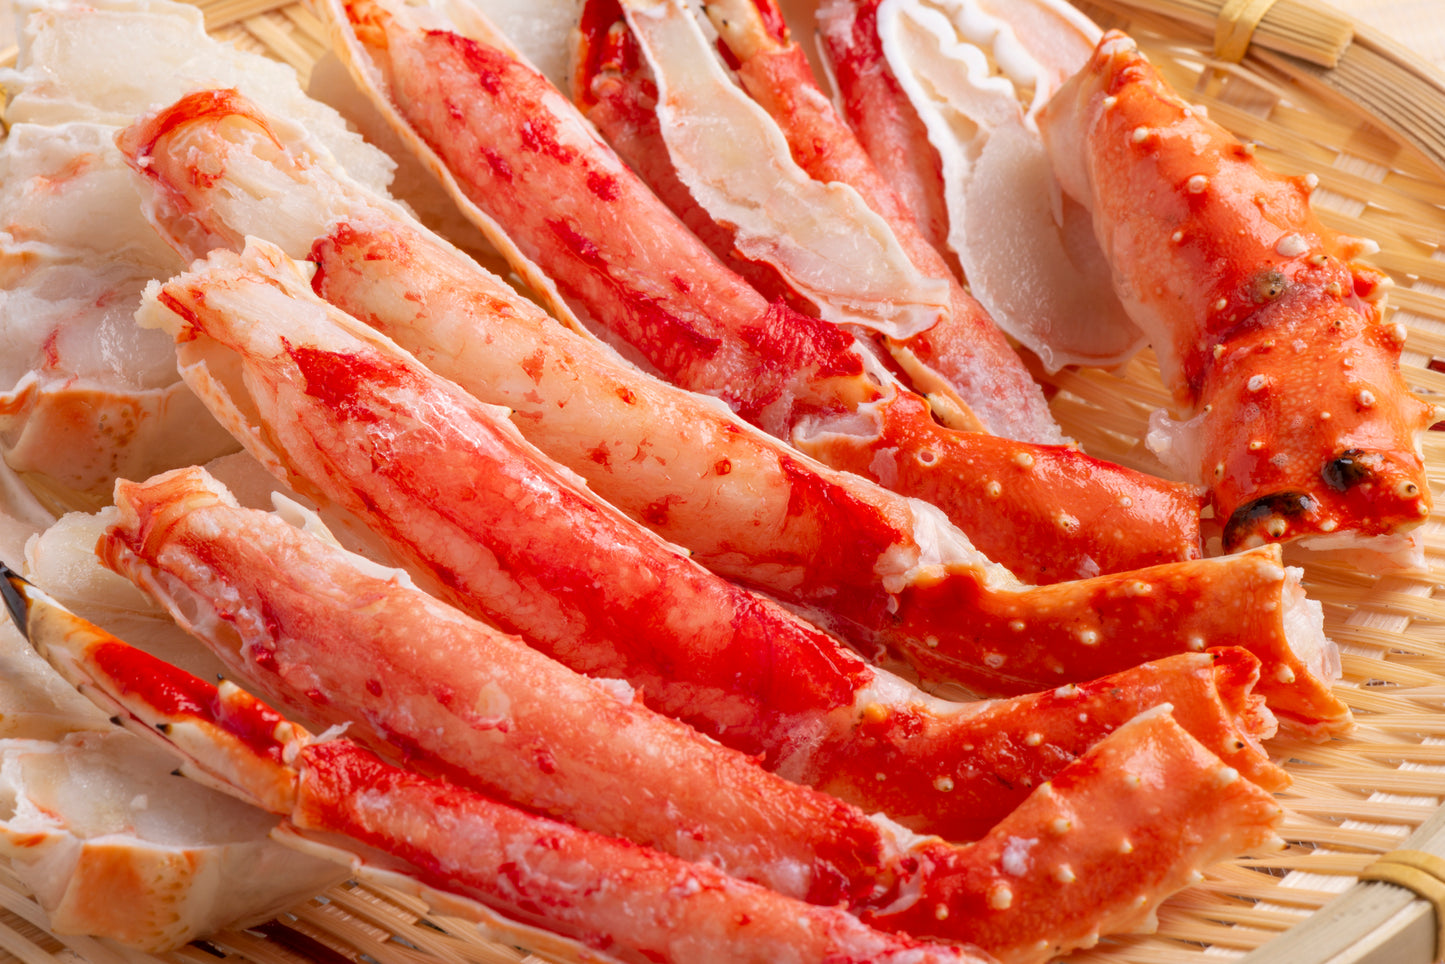 4 extra large boiled king crab legs with shoulders (approx. 1kg)